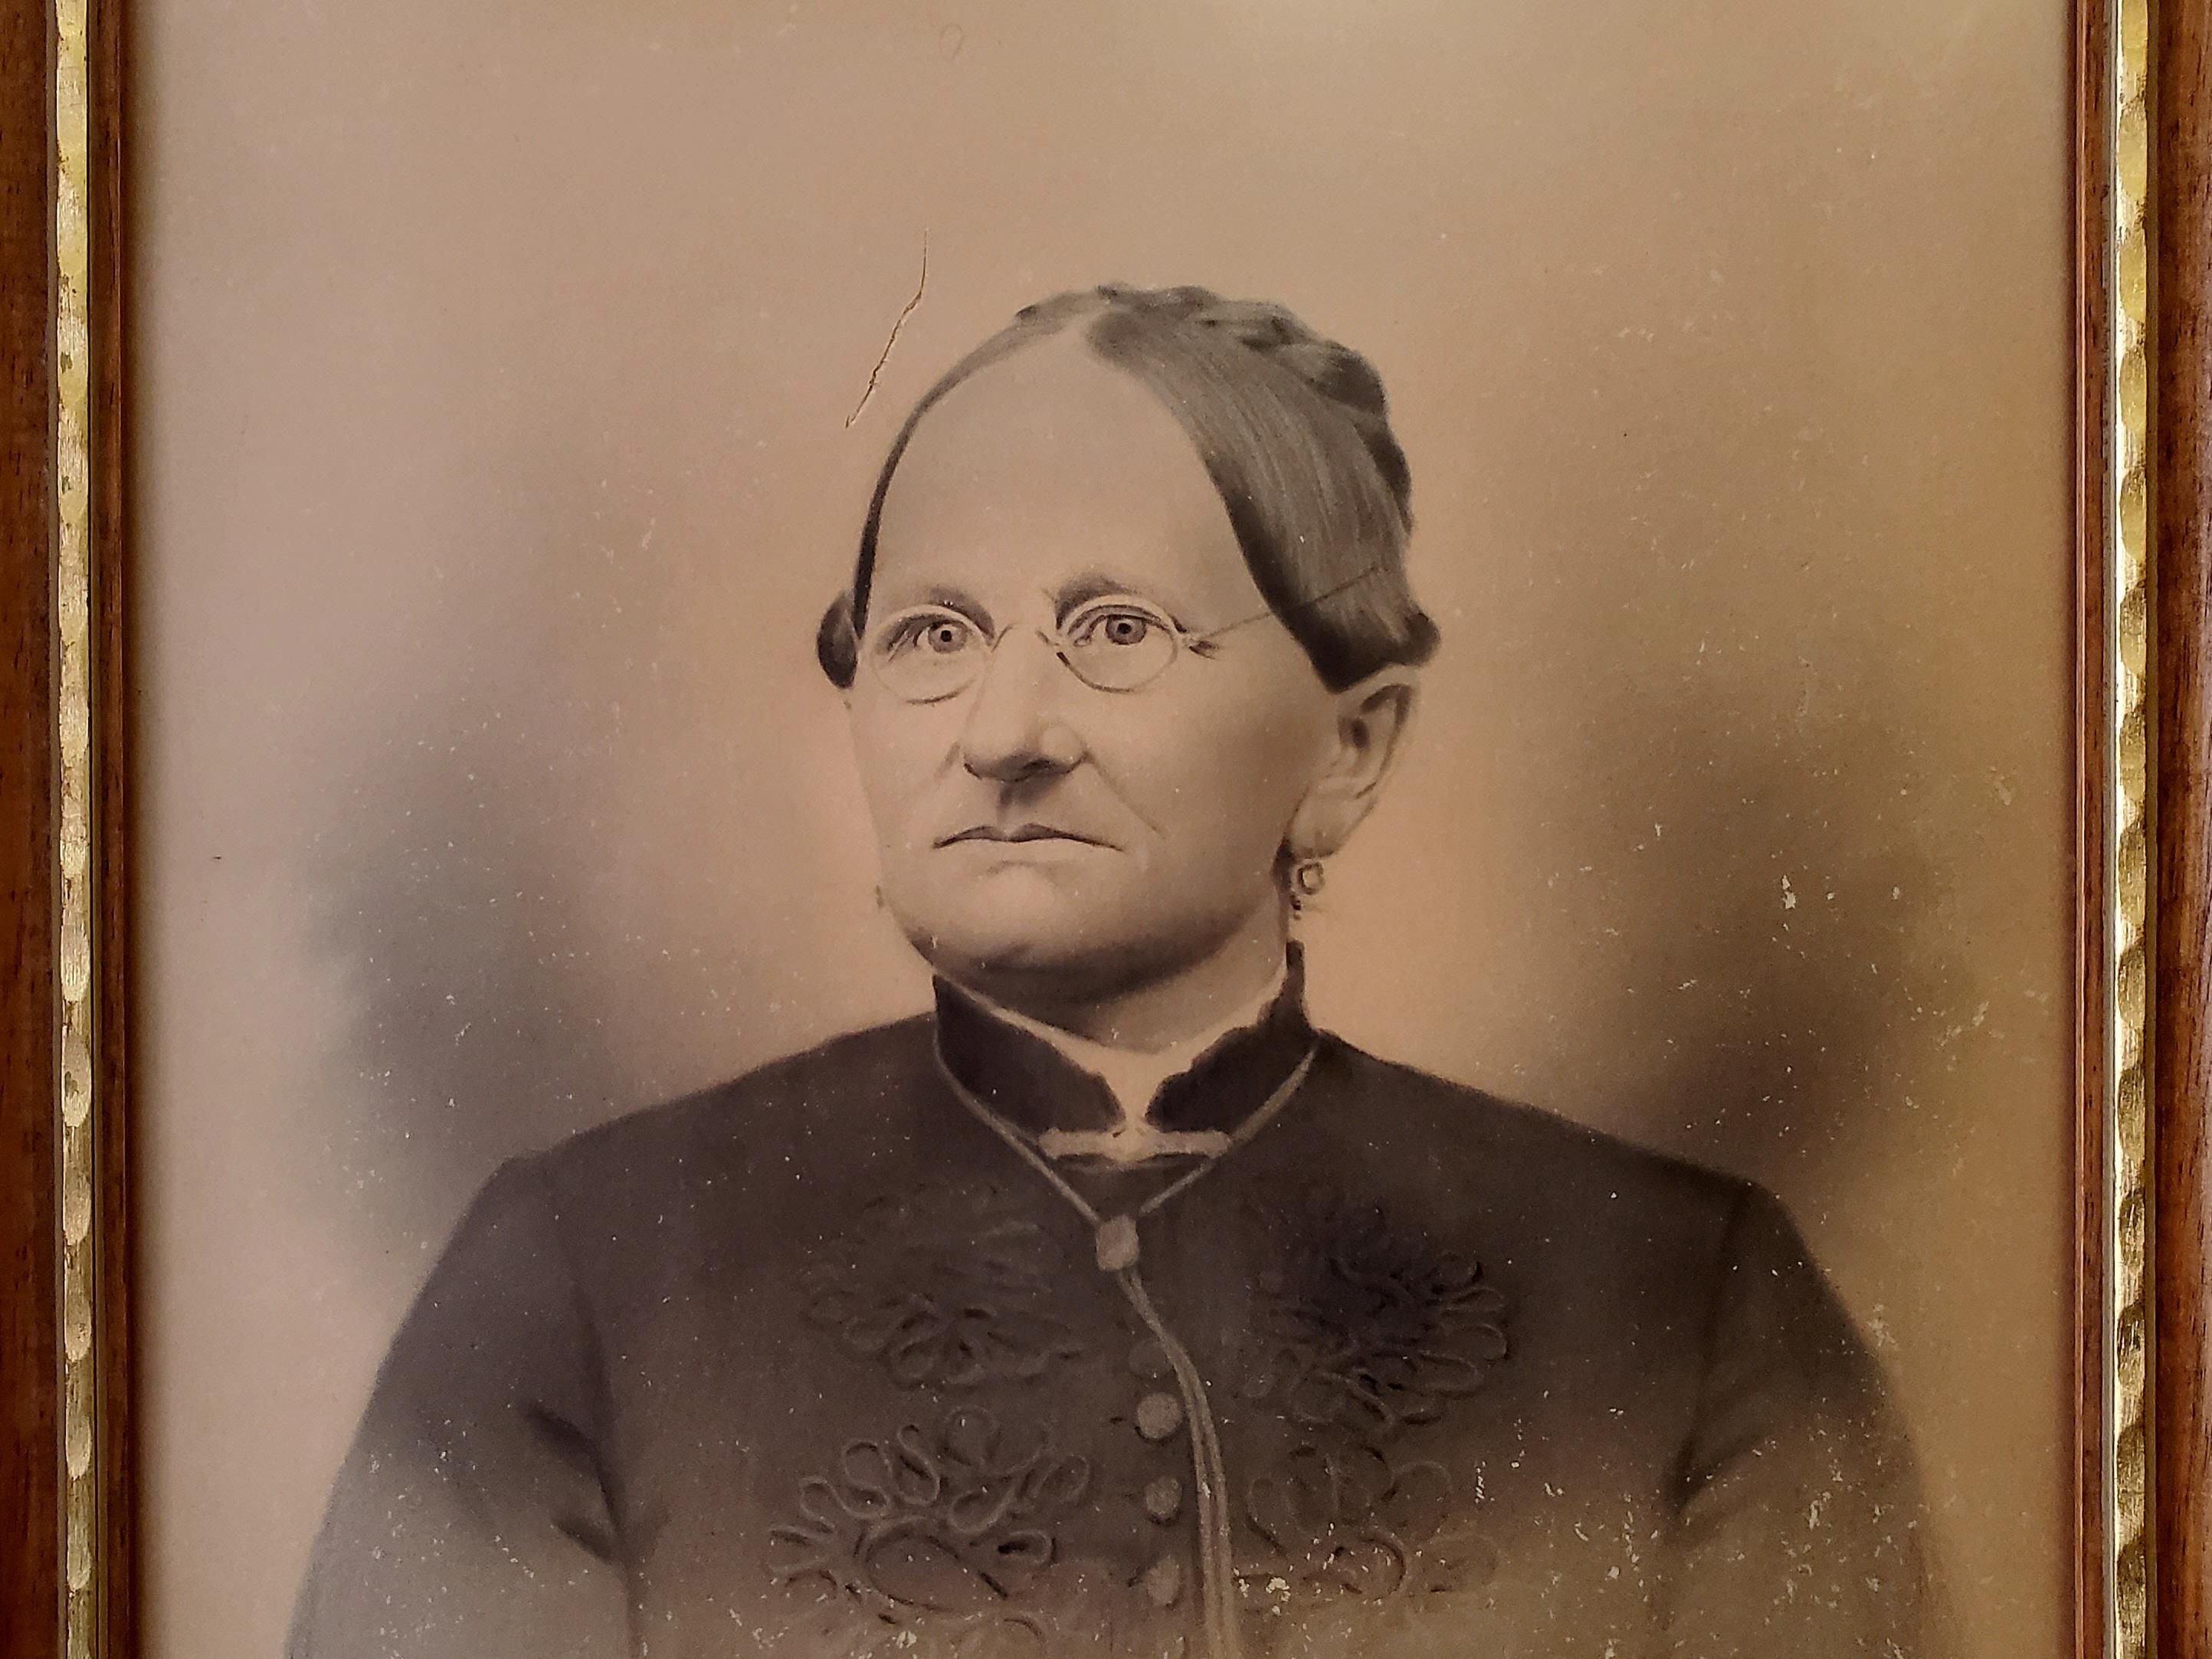 The company I work for has portraits of the founders and I think one of them may be Robin Williams' great-great-grandmother!